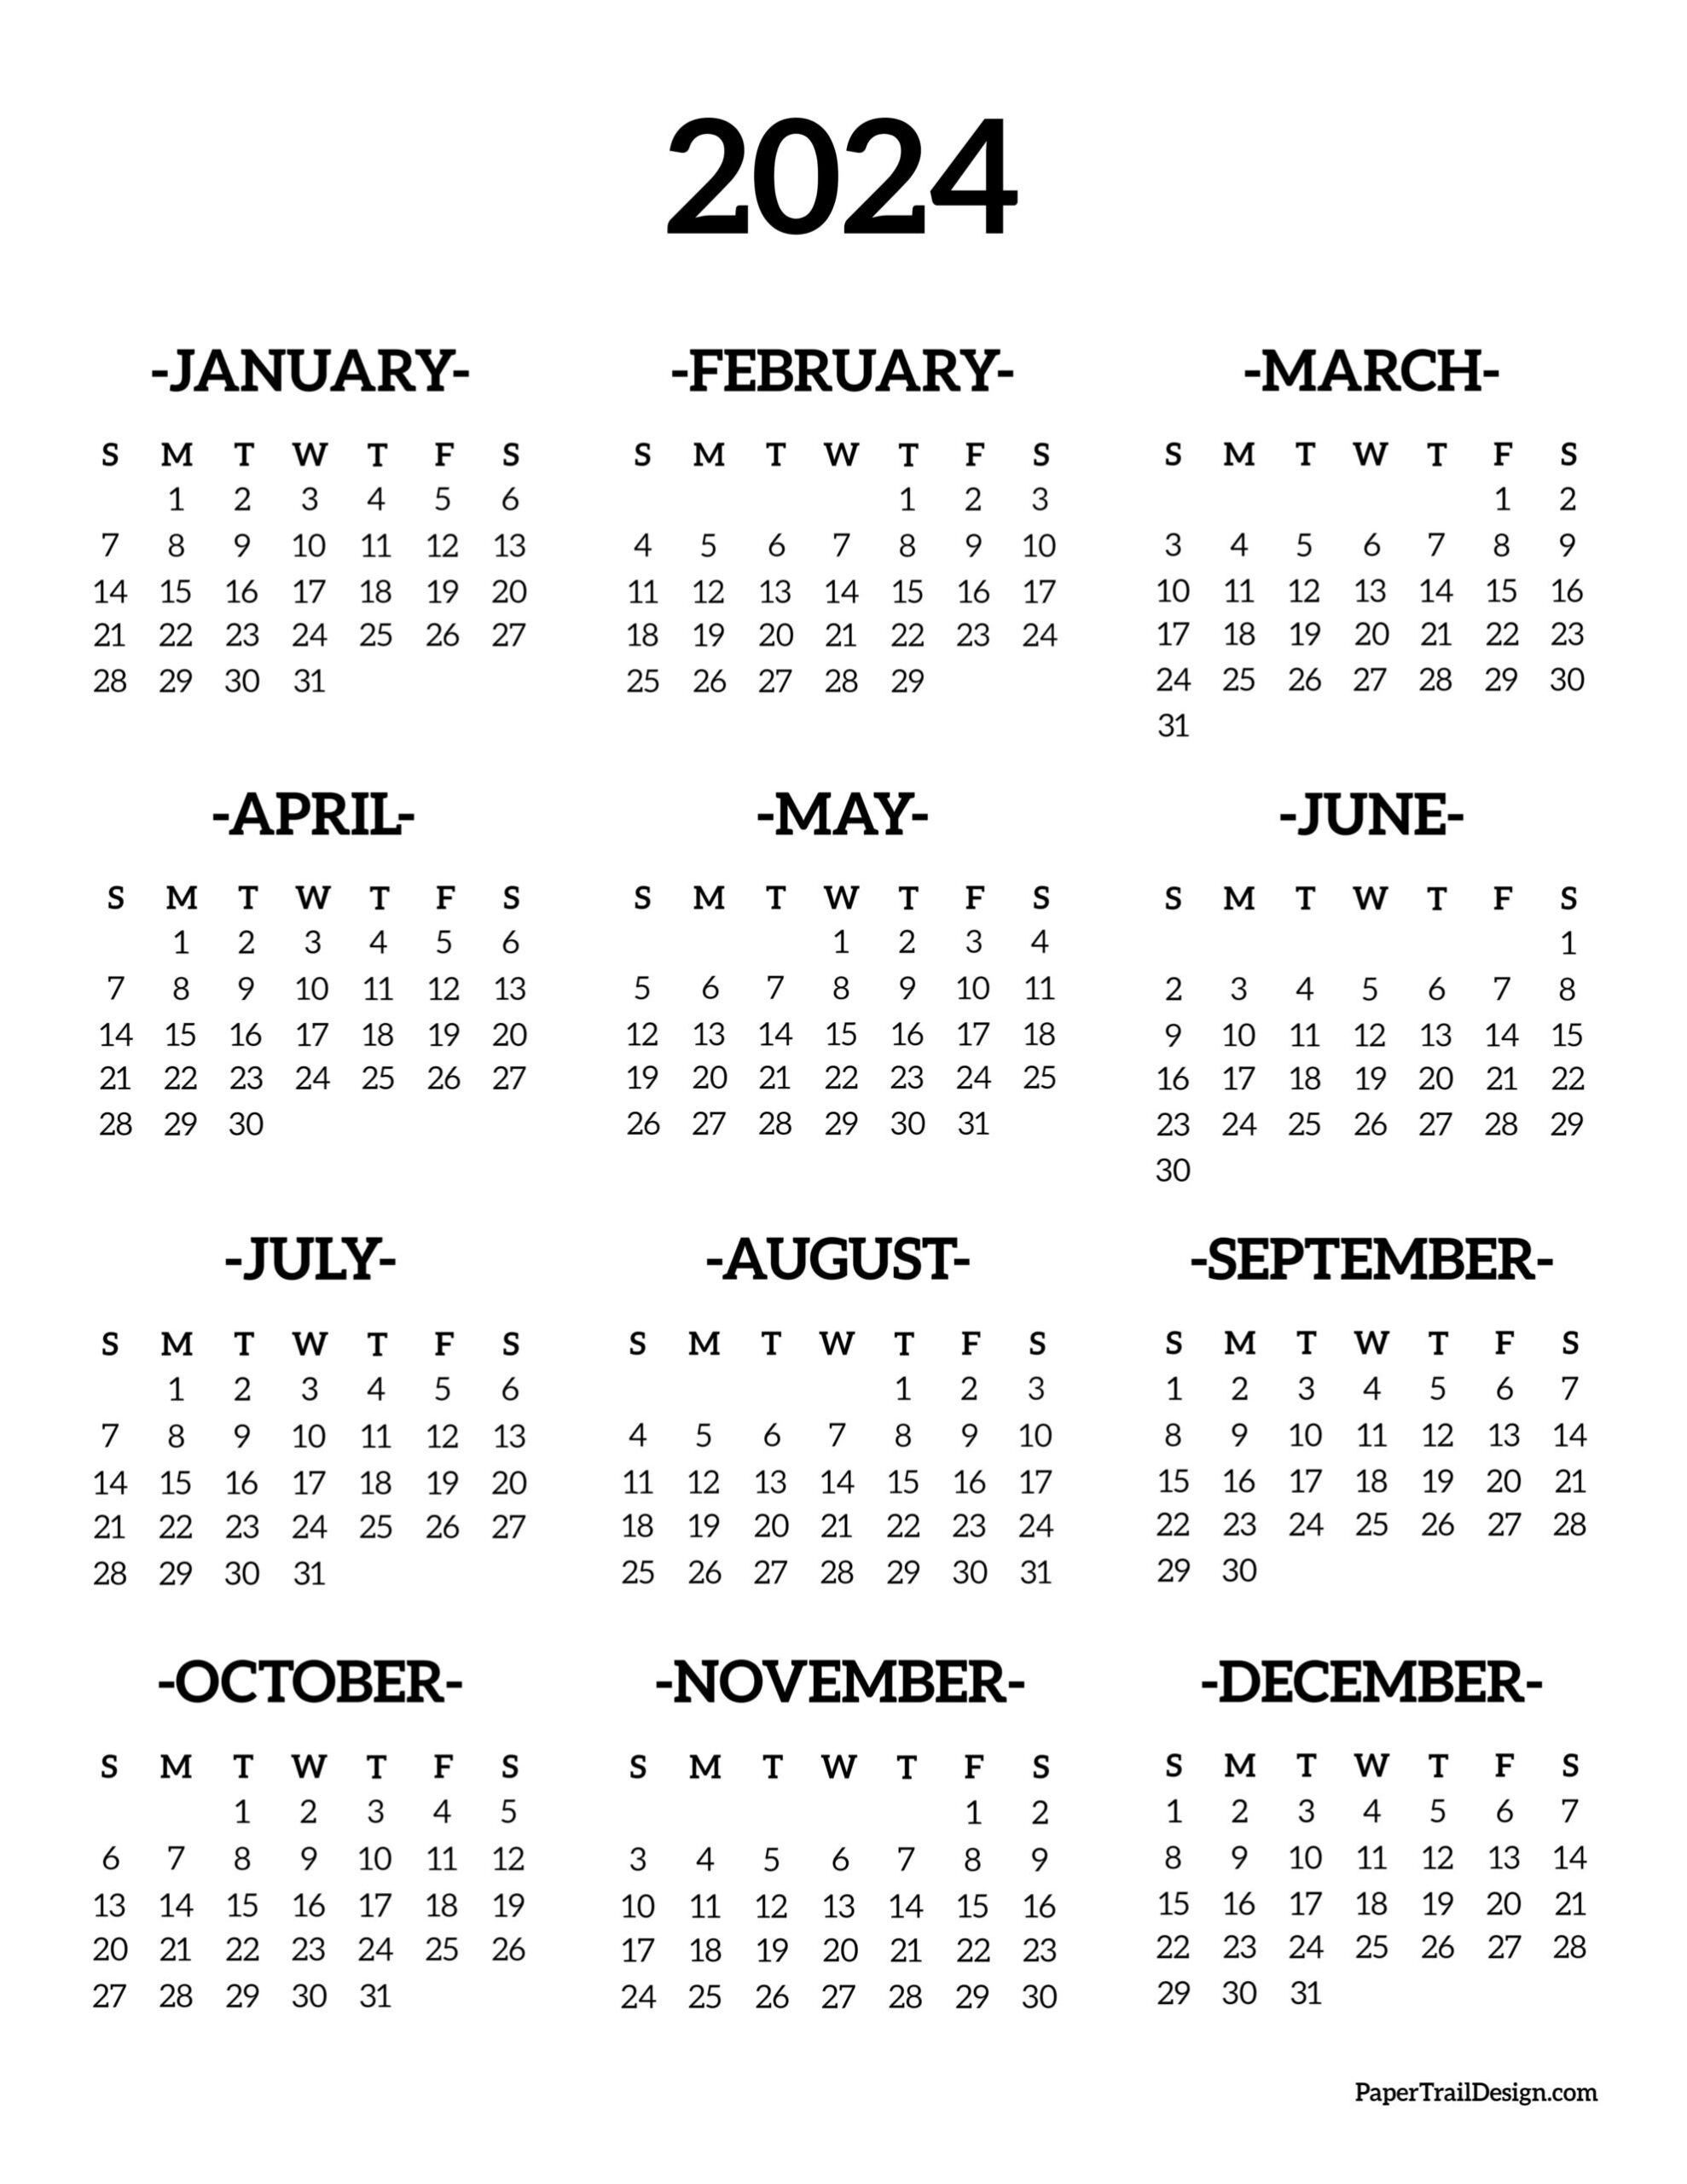 Calendar 2024 Printable One Page - Paper Trail Design throughout Free Printable Calendar 2024 1 Page